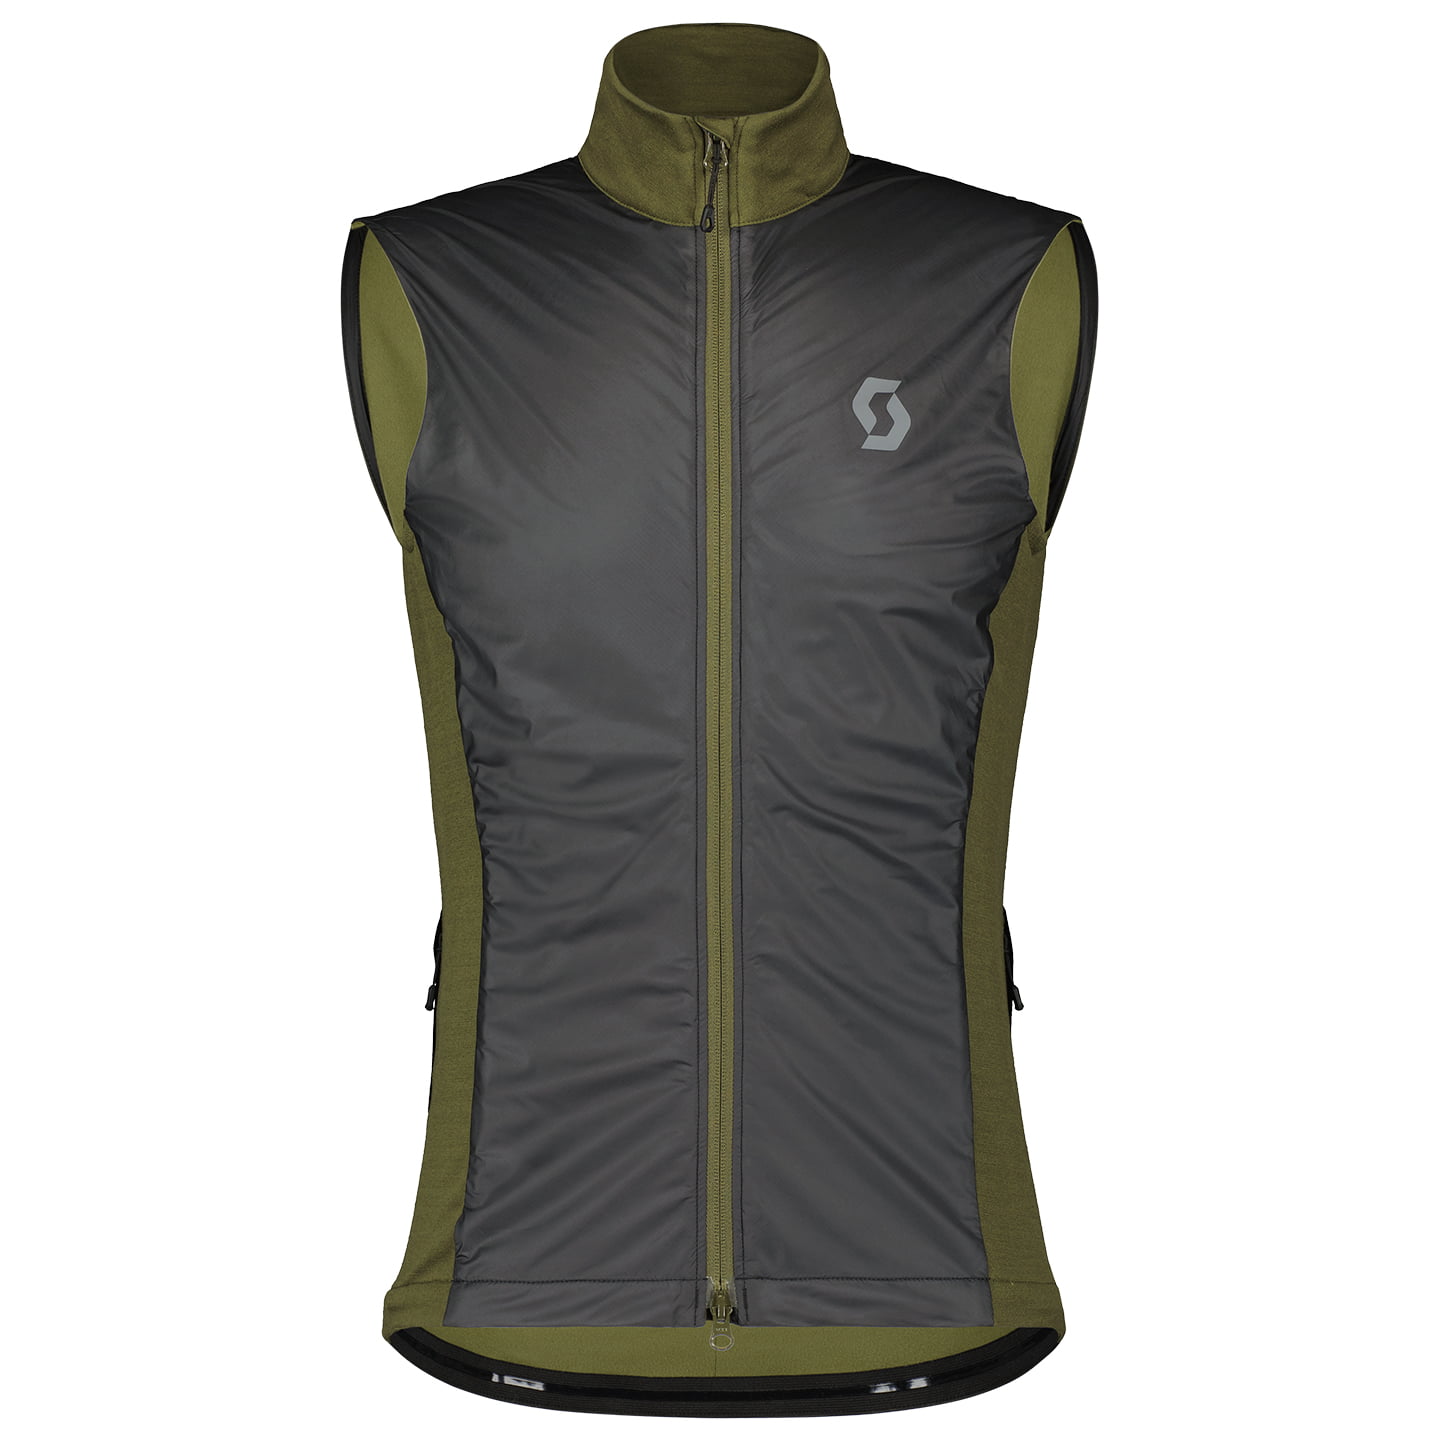 SCOTT Gravel Warm Merino Thermal Vest, for men, size M, Cycling vest, Cycle clothing